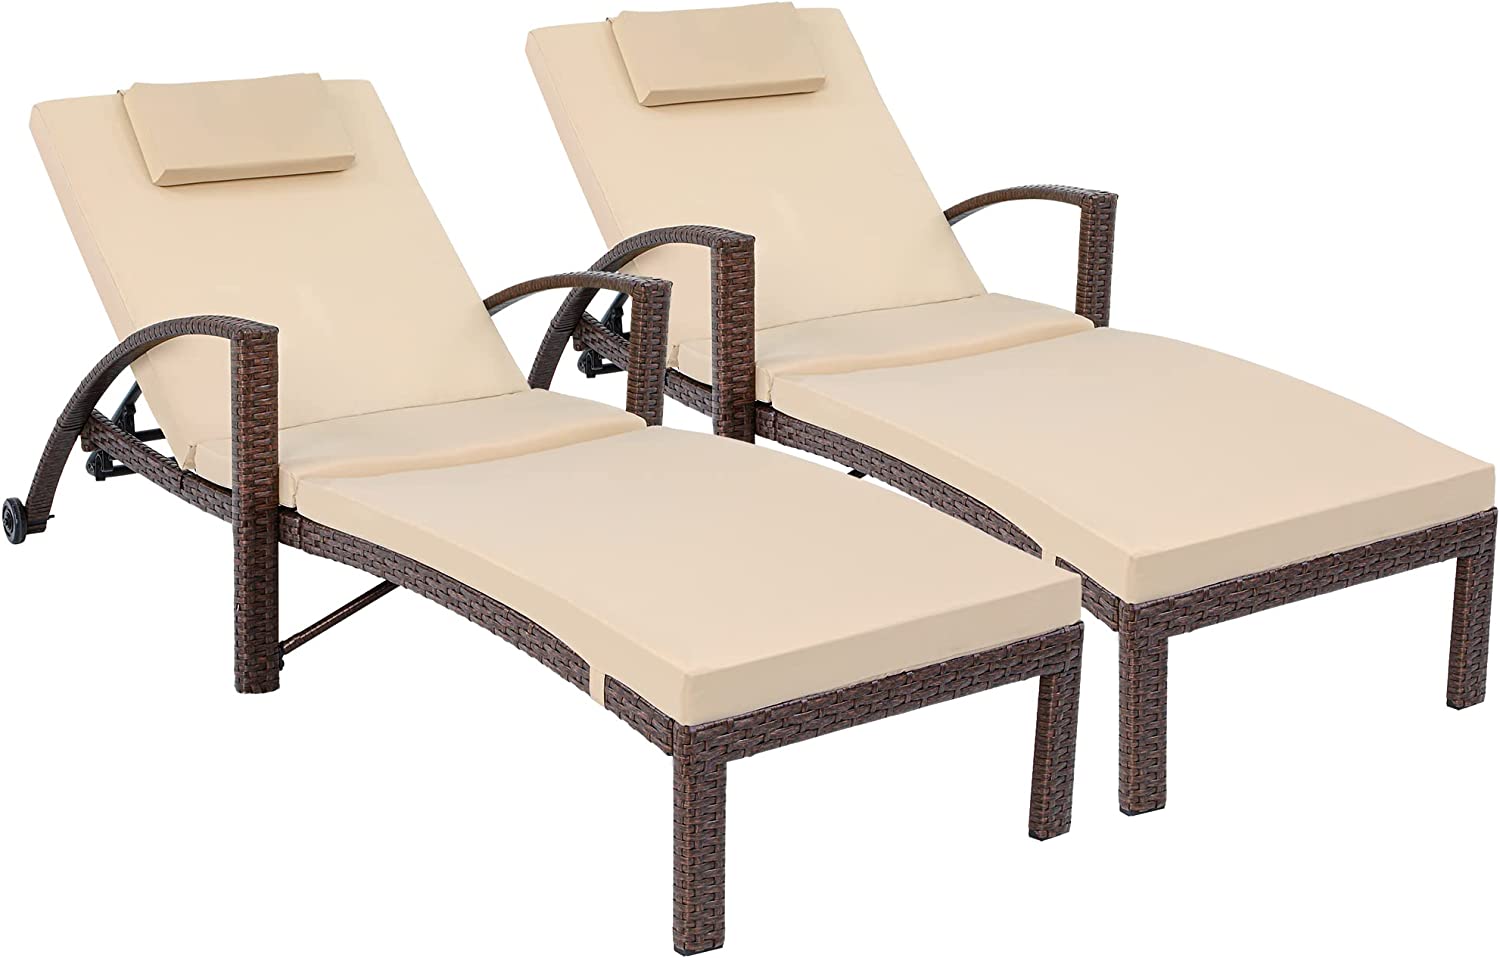 YITAHOME Outdoor Chaise Lounge Chairs, PE Rattan Wicker Patio Pool Loungers with Adjustable Backrest, Arm, Cushion, Pillow and Wheels for Poolside Backyard Porch Garden Beach (2, Brown) - image 1 of 9